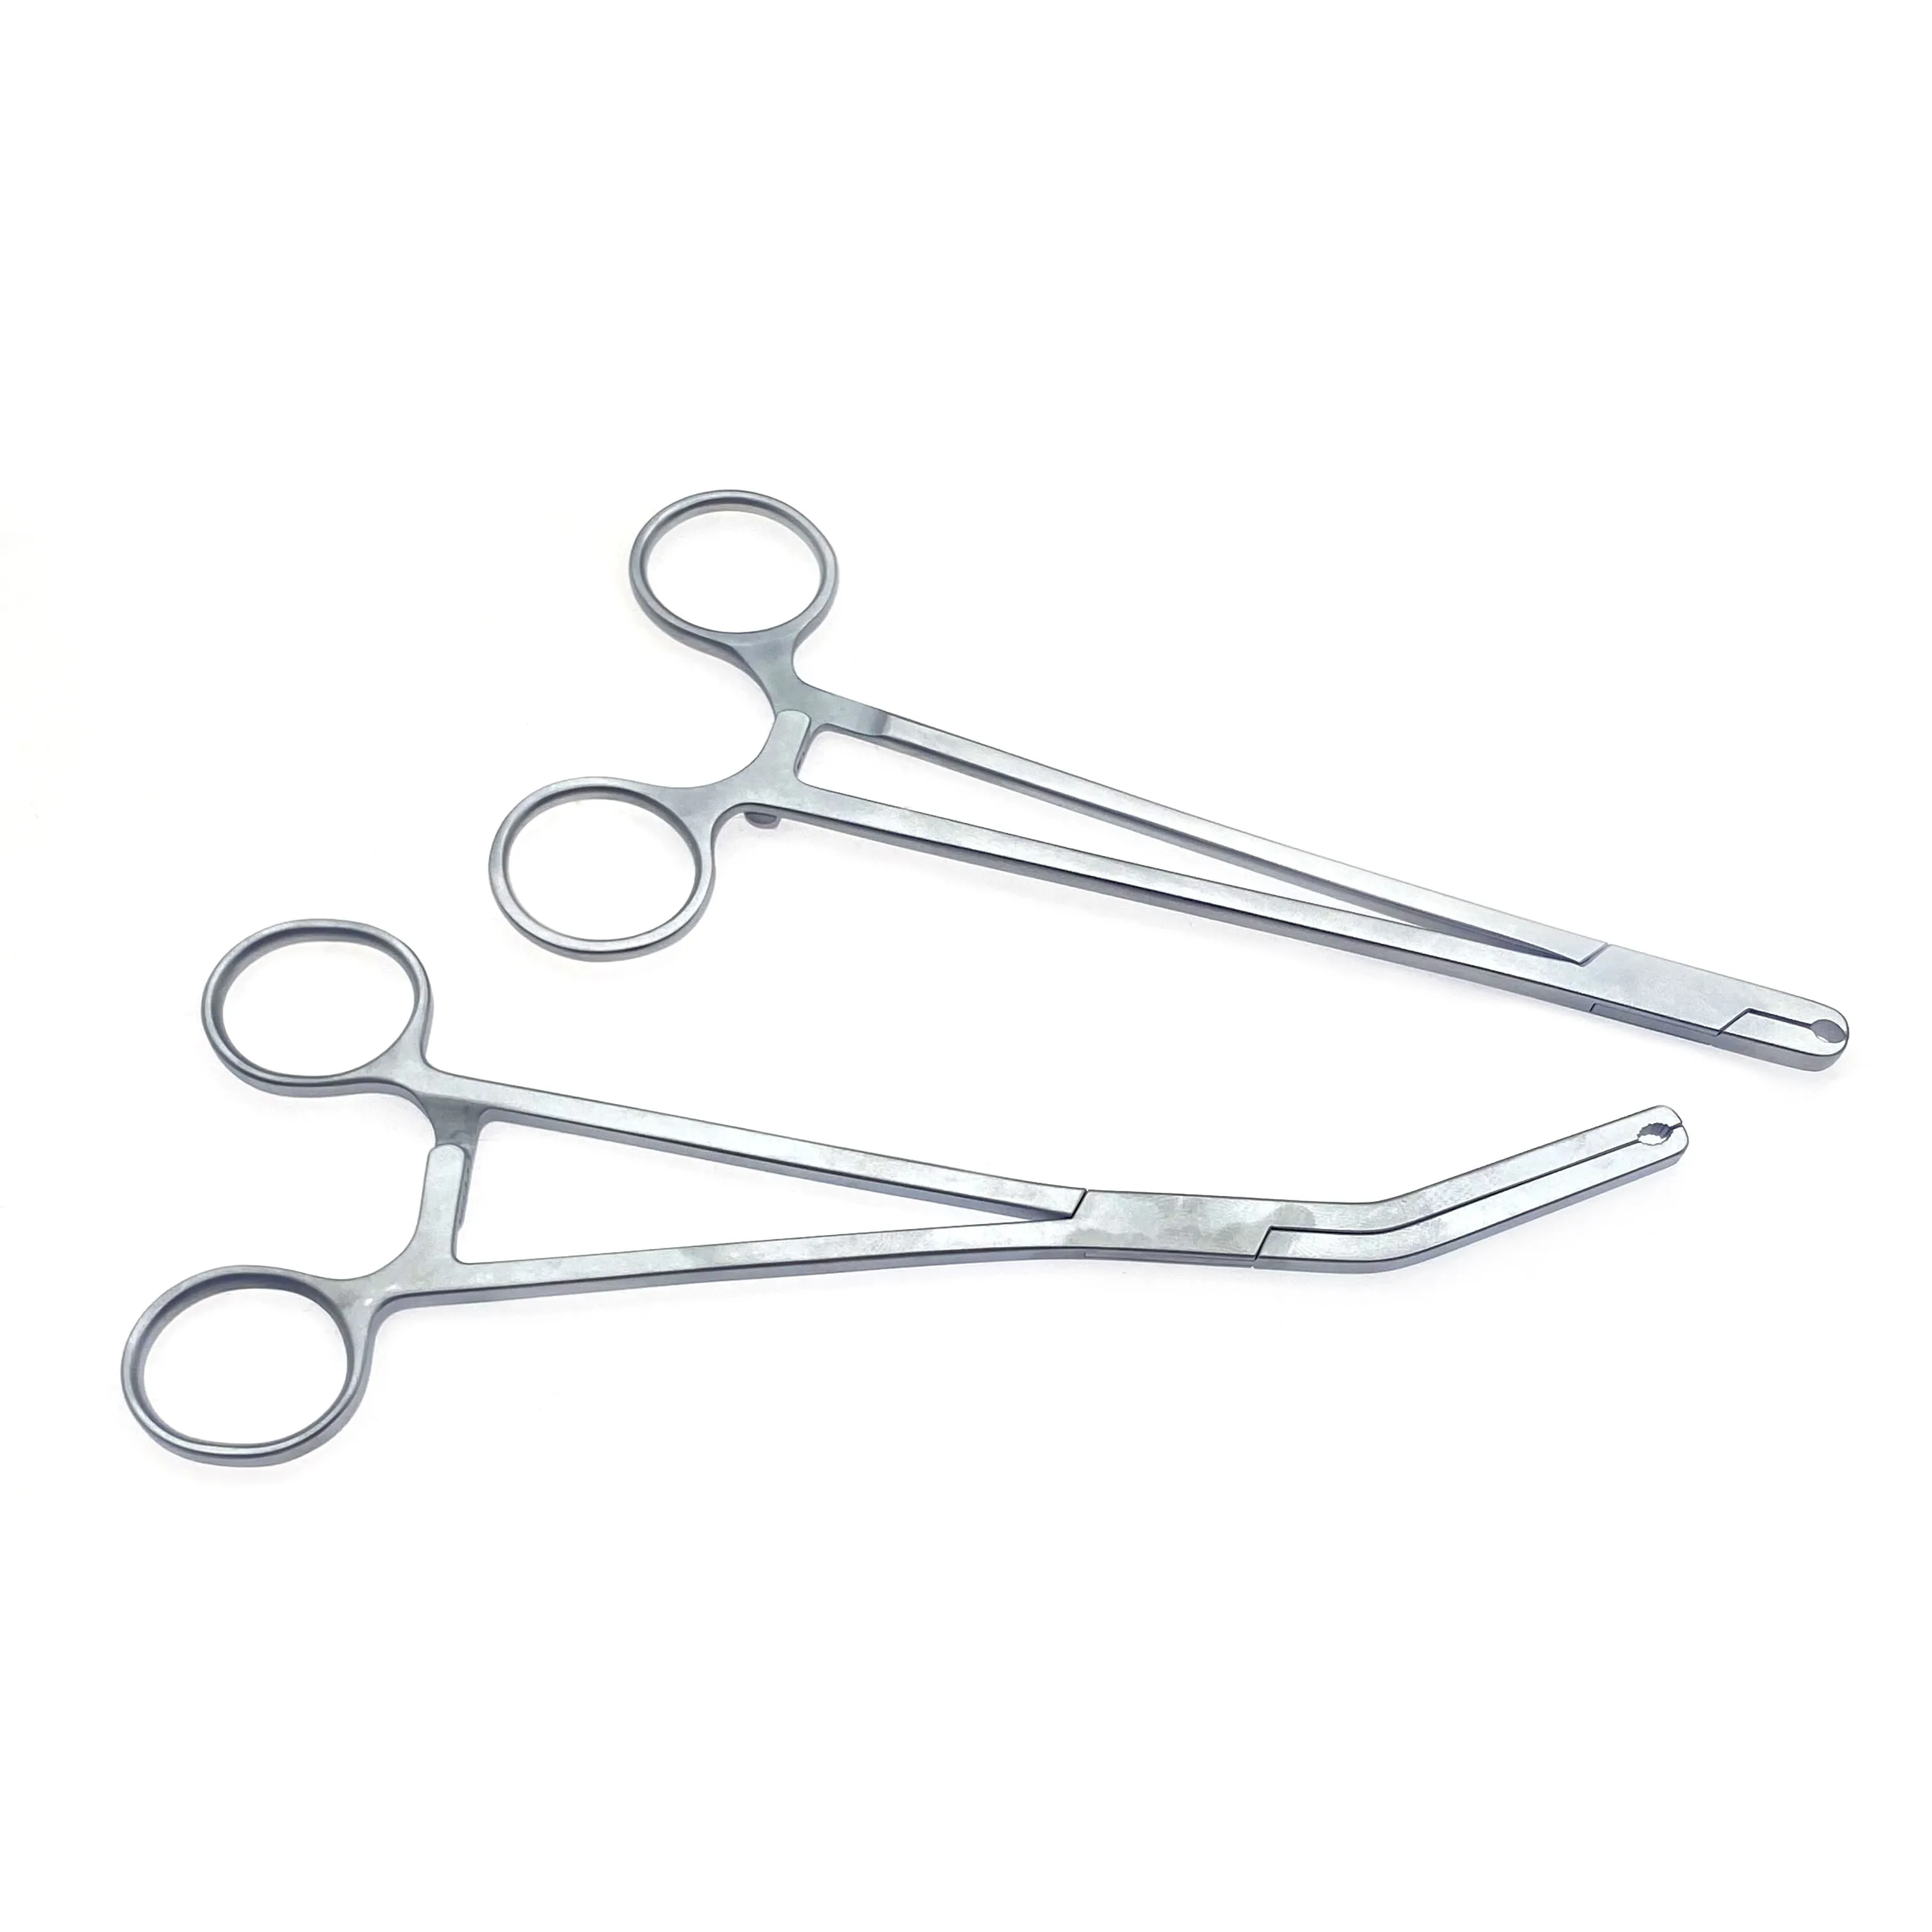 stainless-steel-rotation-rod-forceps-spinal-instrument-55mm-orthopedics-surgical-instruments